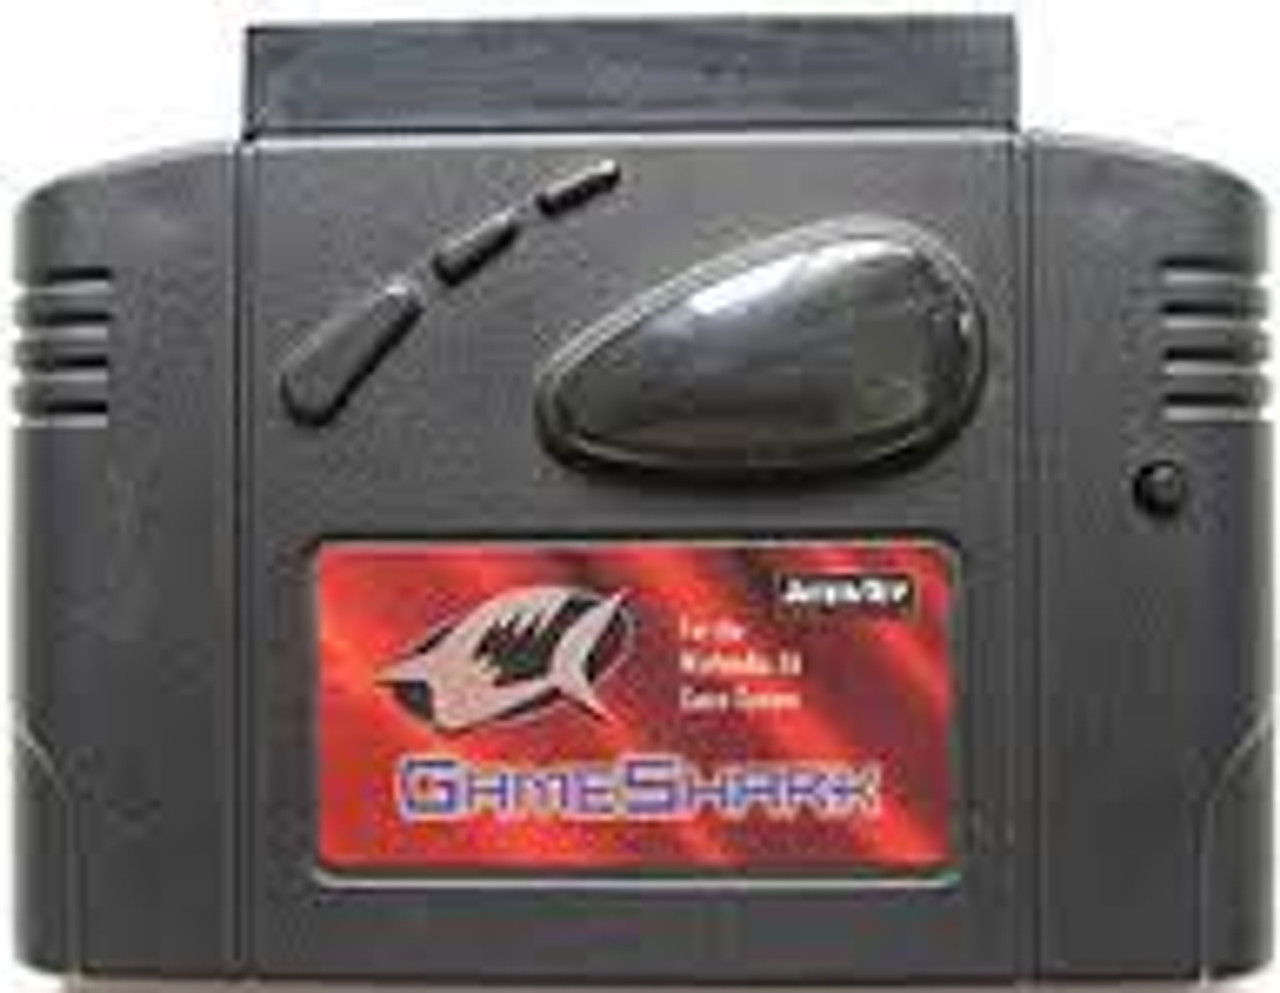 Gameshark 64 Used Game For | DKOldies